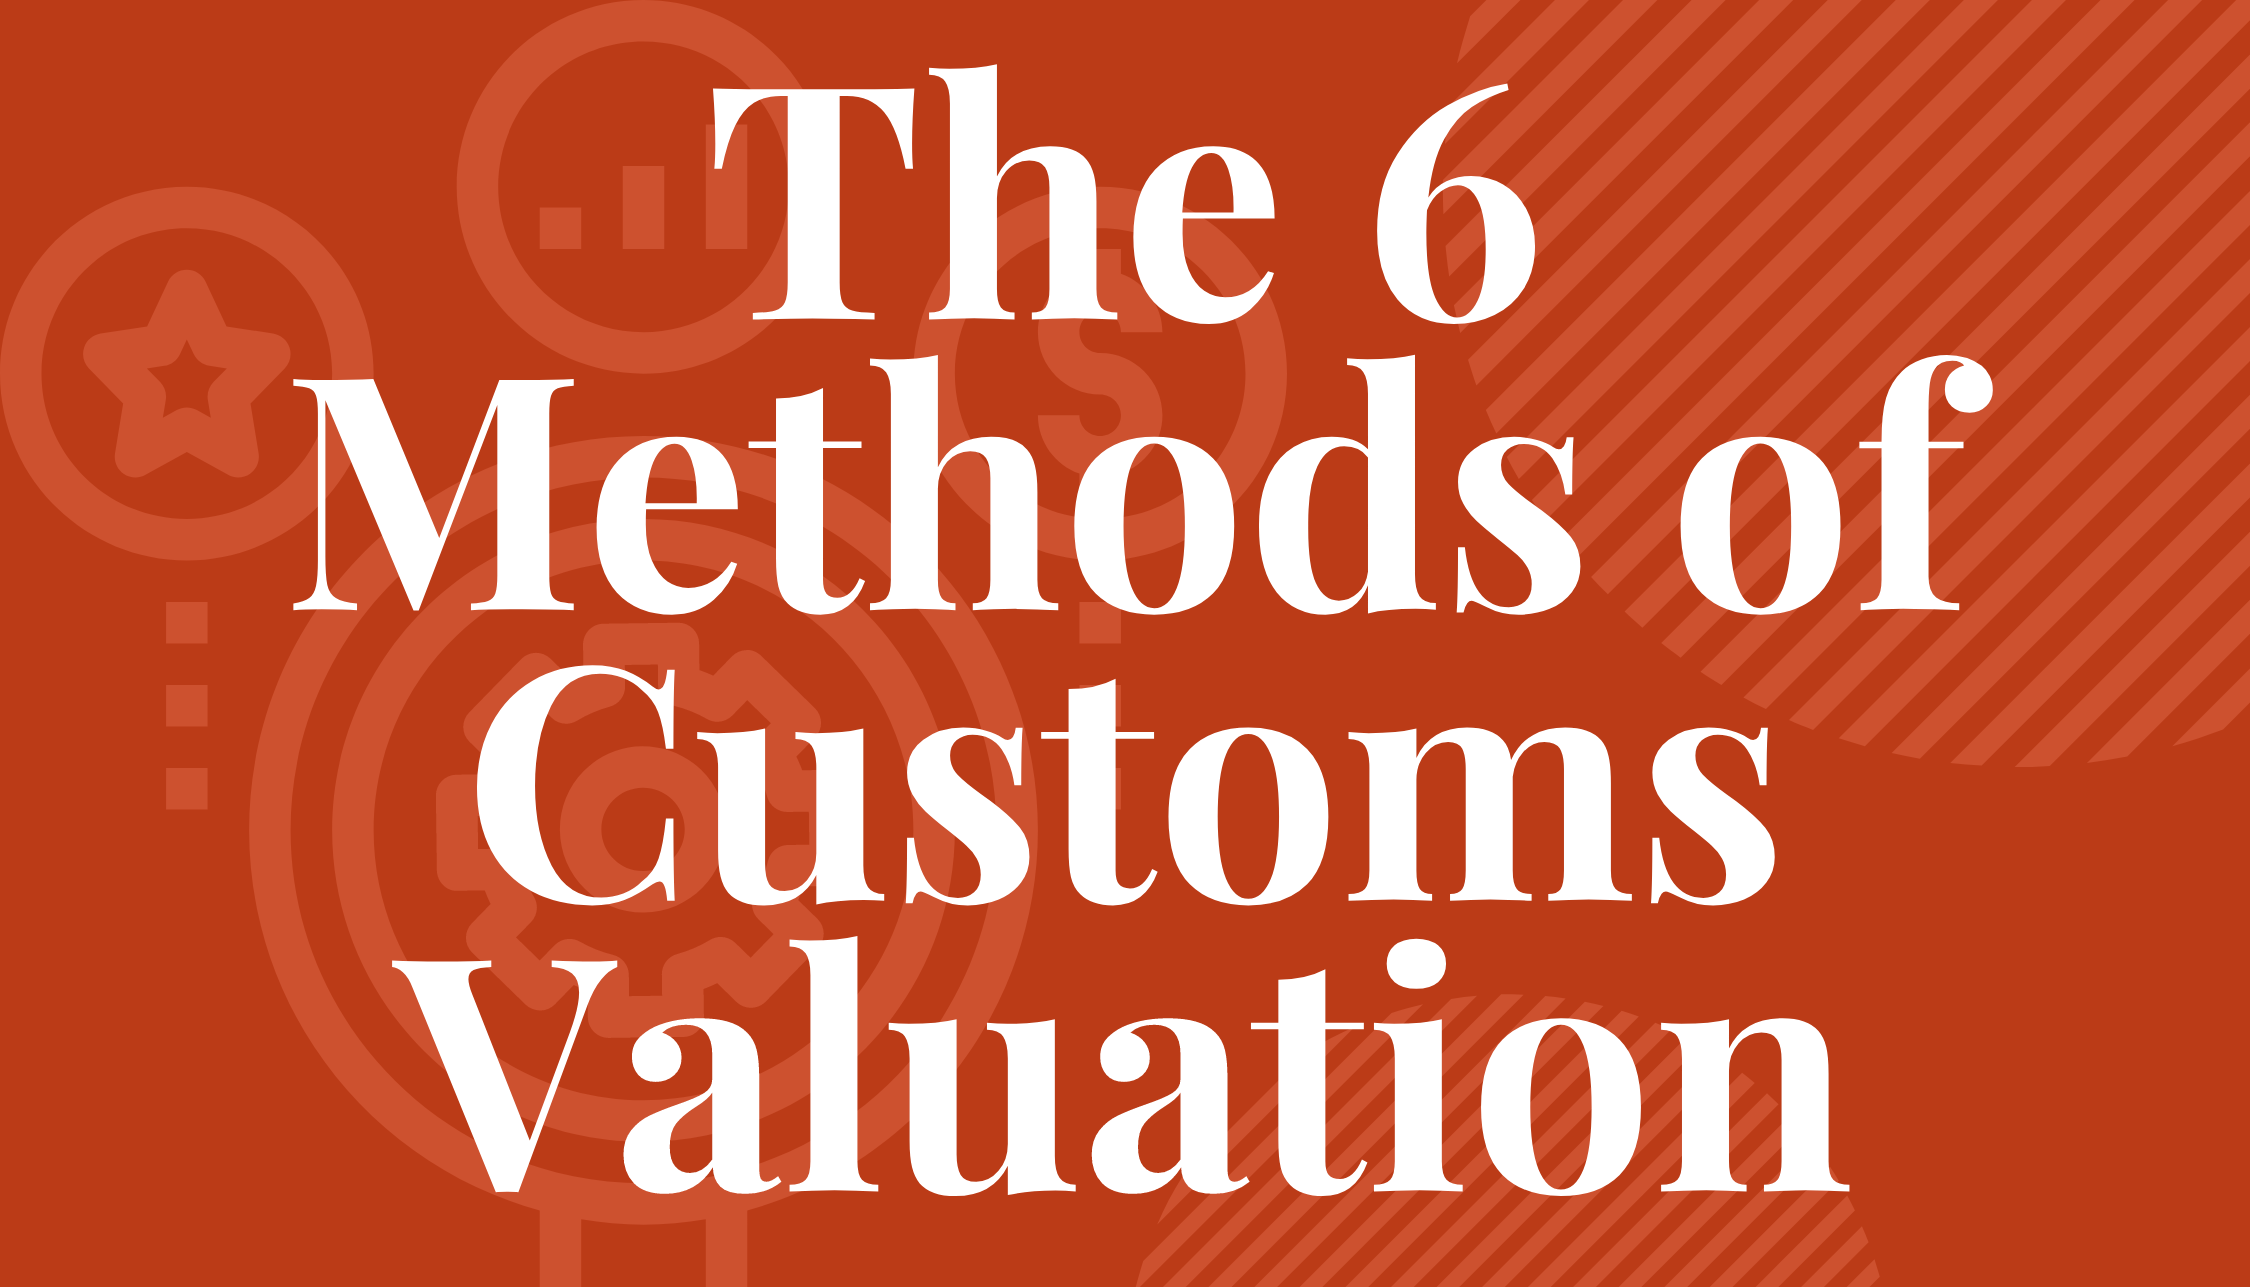 The 6 Methods of Customs Valuation